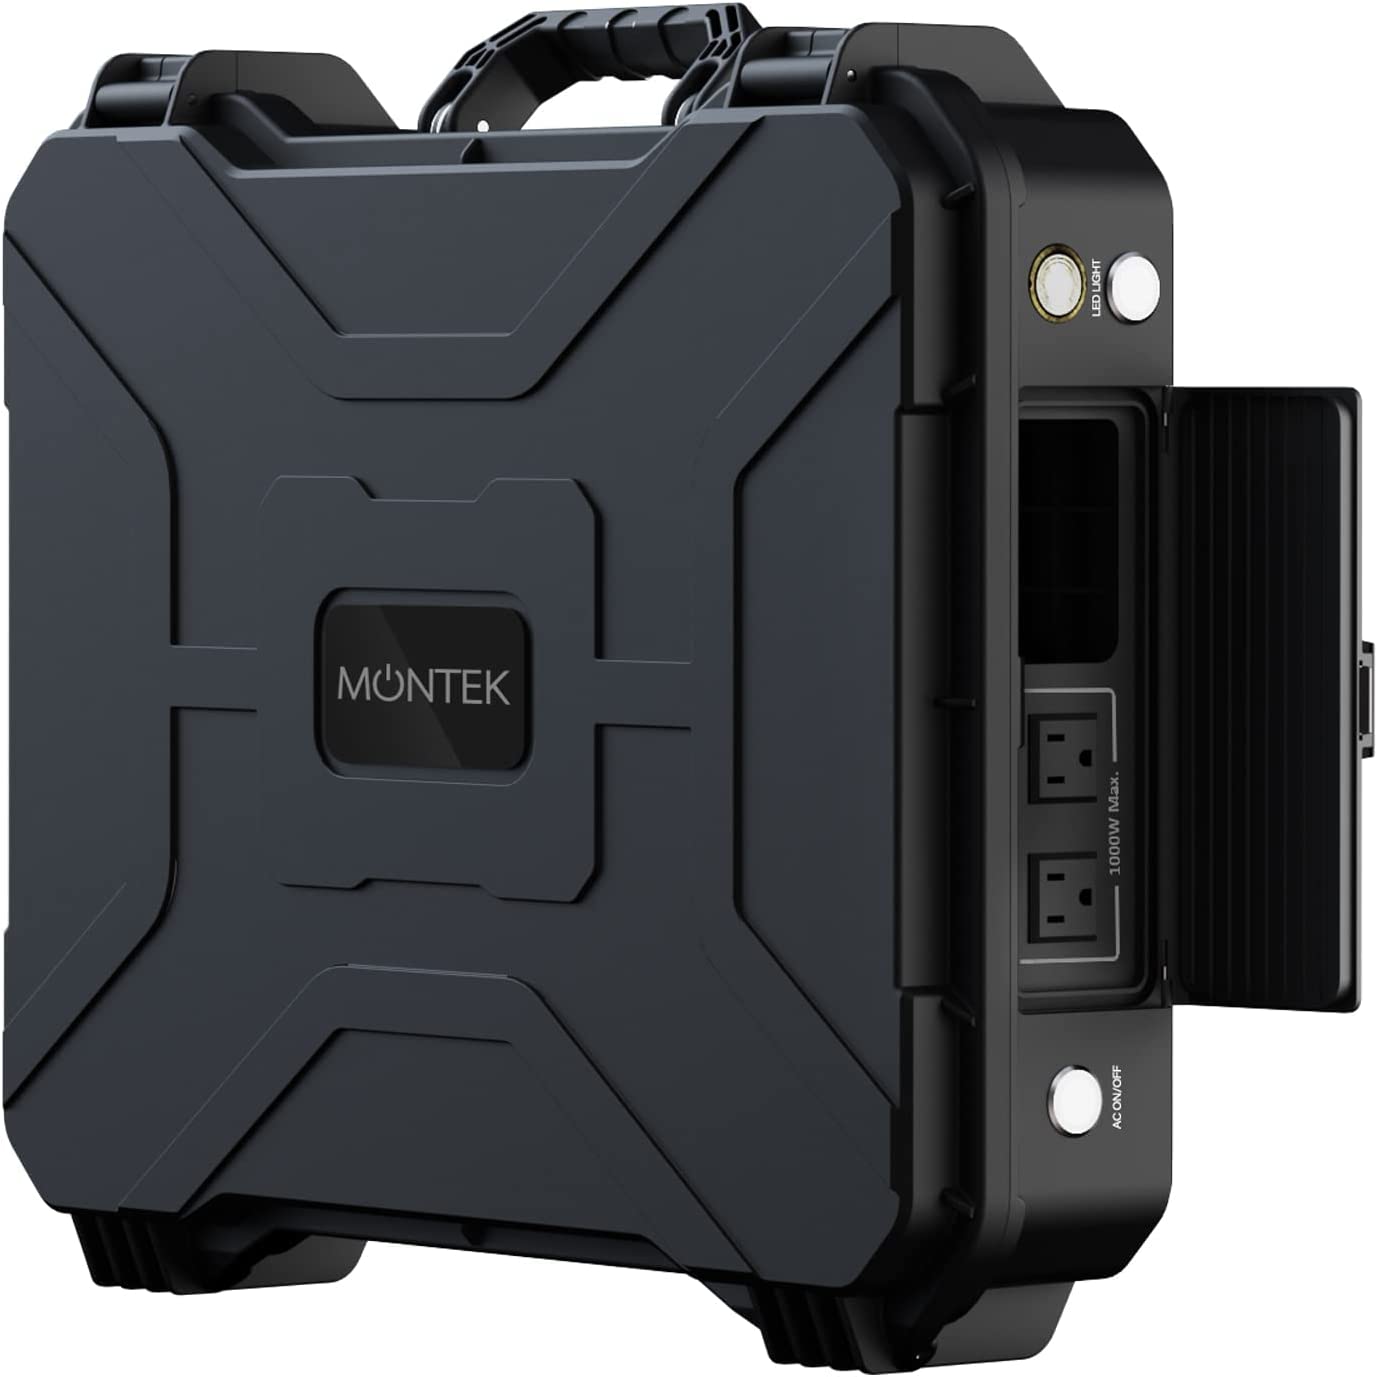 MONTEK X1000 Portable Power Station, Solar Generator with 1010Wh, 2x1000W AC & 100W PD Port, 2.5H to Full Charge, Water Resistant, for Home Backup Battery, Outdoor RV, Camping, Emergencies